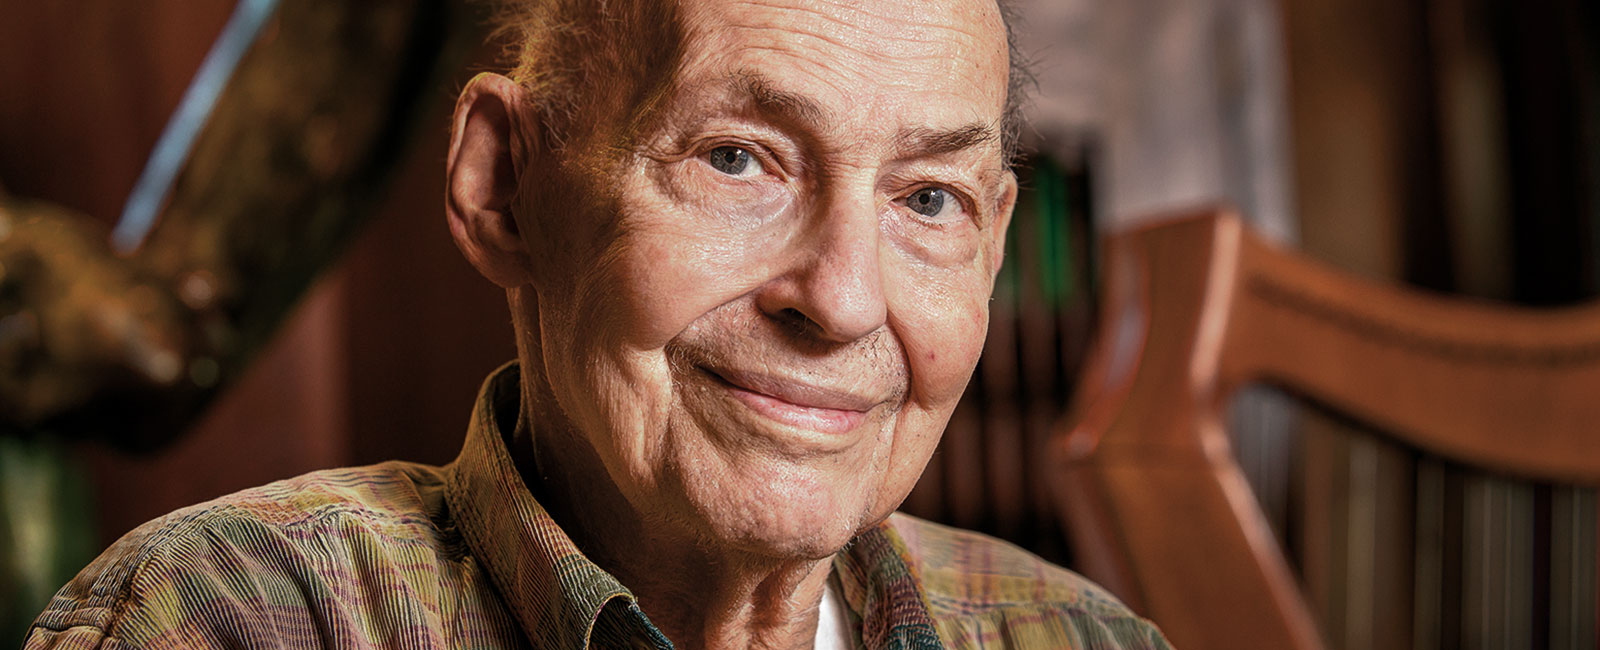 Marvin Minsky, founding father of artificial intelligence, wins the BBVA Foundation Frontiers of Knowledge Award in Information and Communication Technologies - Premios Fronteras